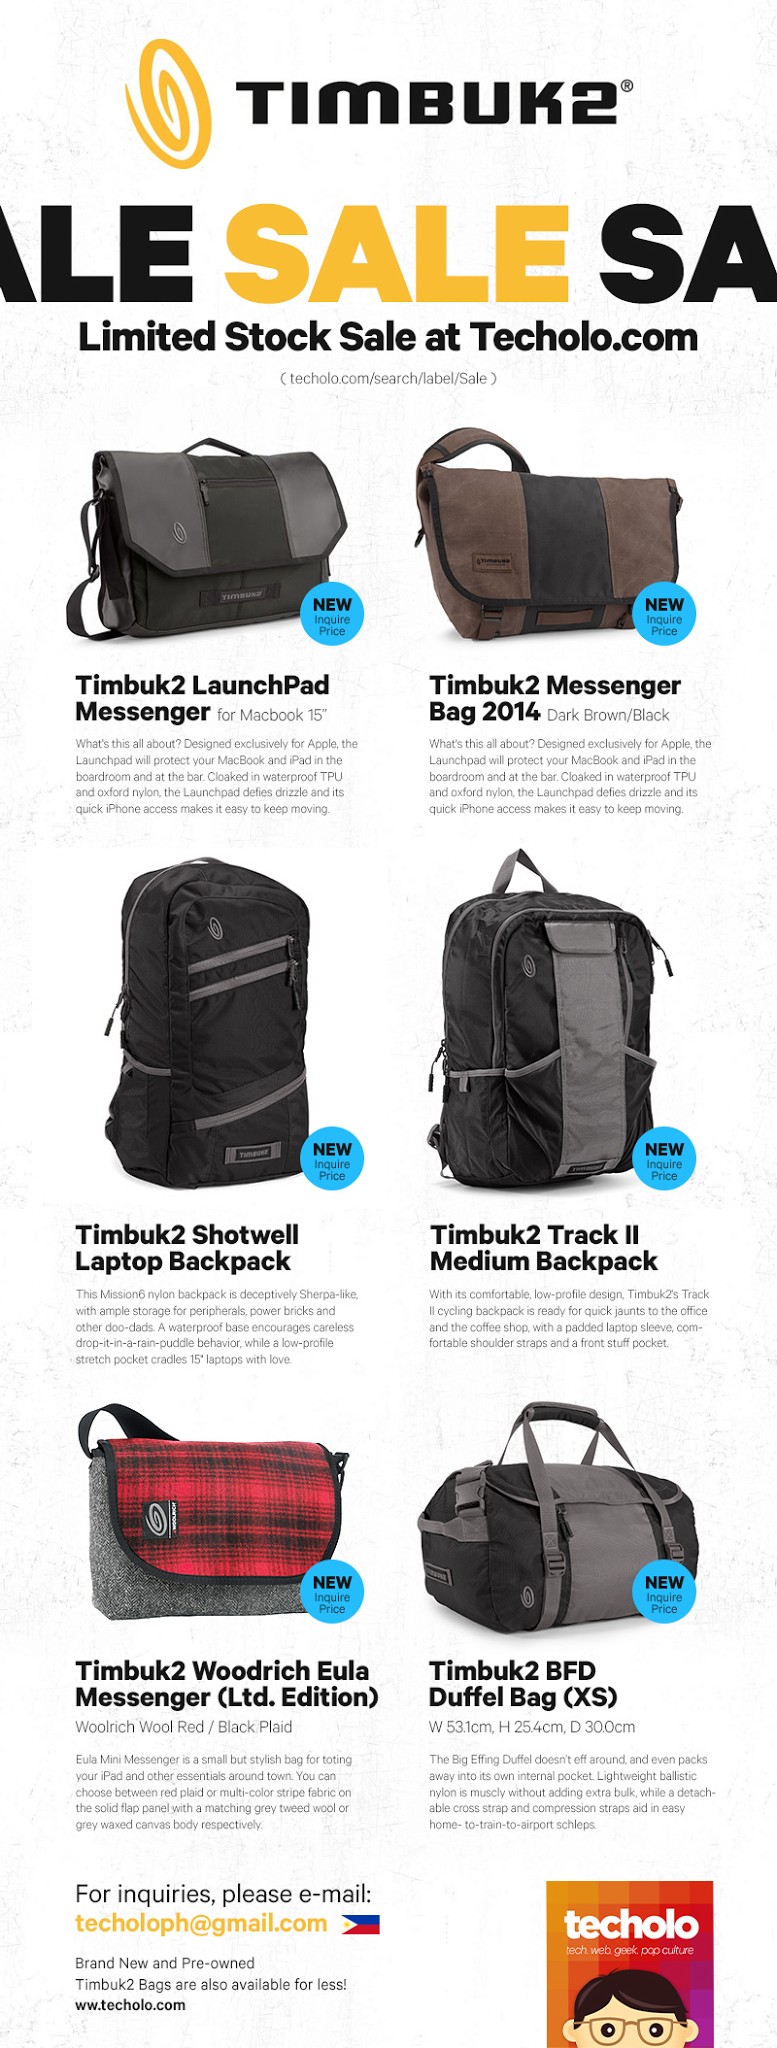 Timbuk2 1849-3-5318 Division Laptop Backpack, Twilight : Amazon.in:  Computers & Accessories